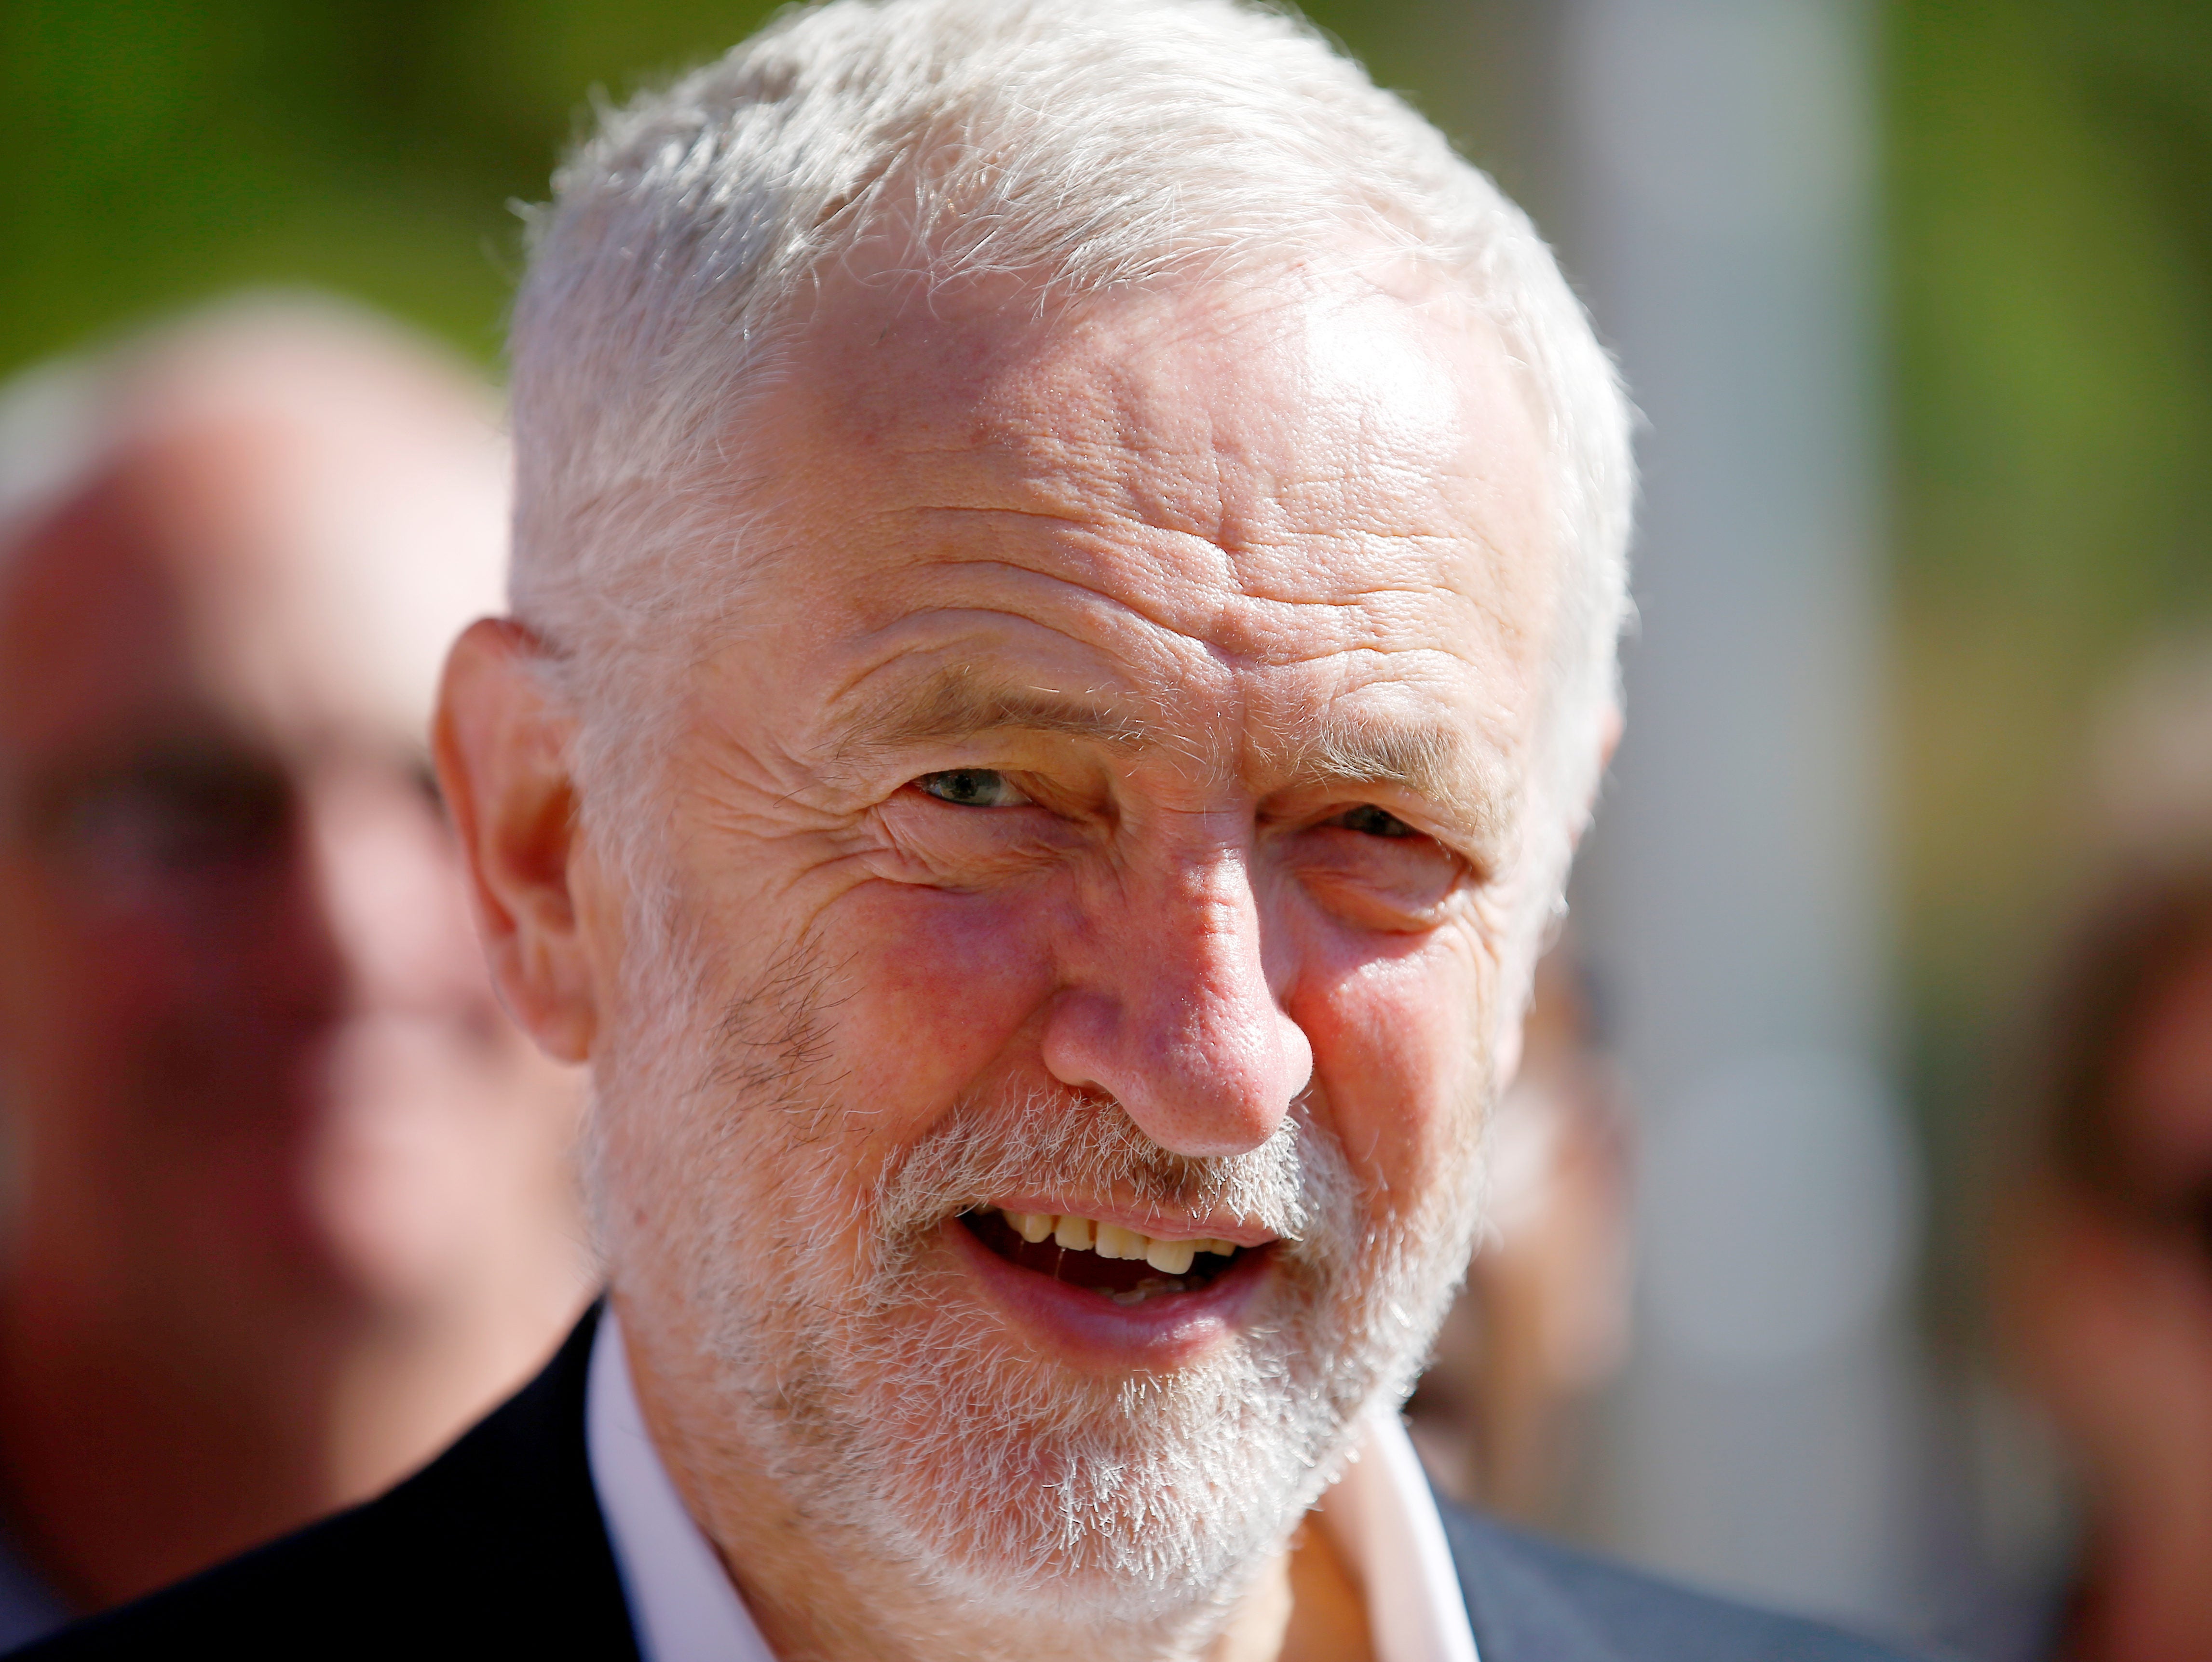 Jeremy Corbyn to propose turning news outlets into charities for funding boost and reforms to BBC in speech on future of media